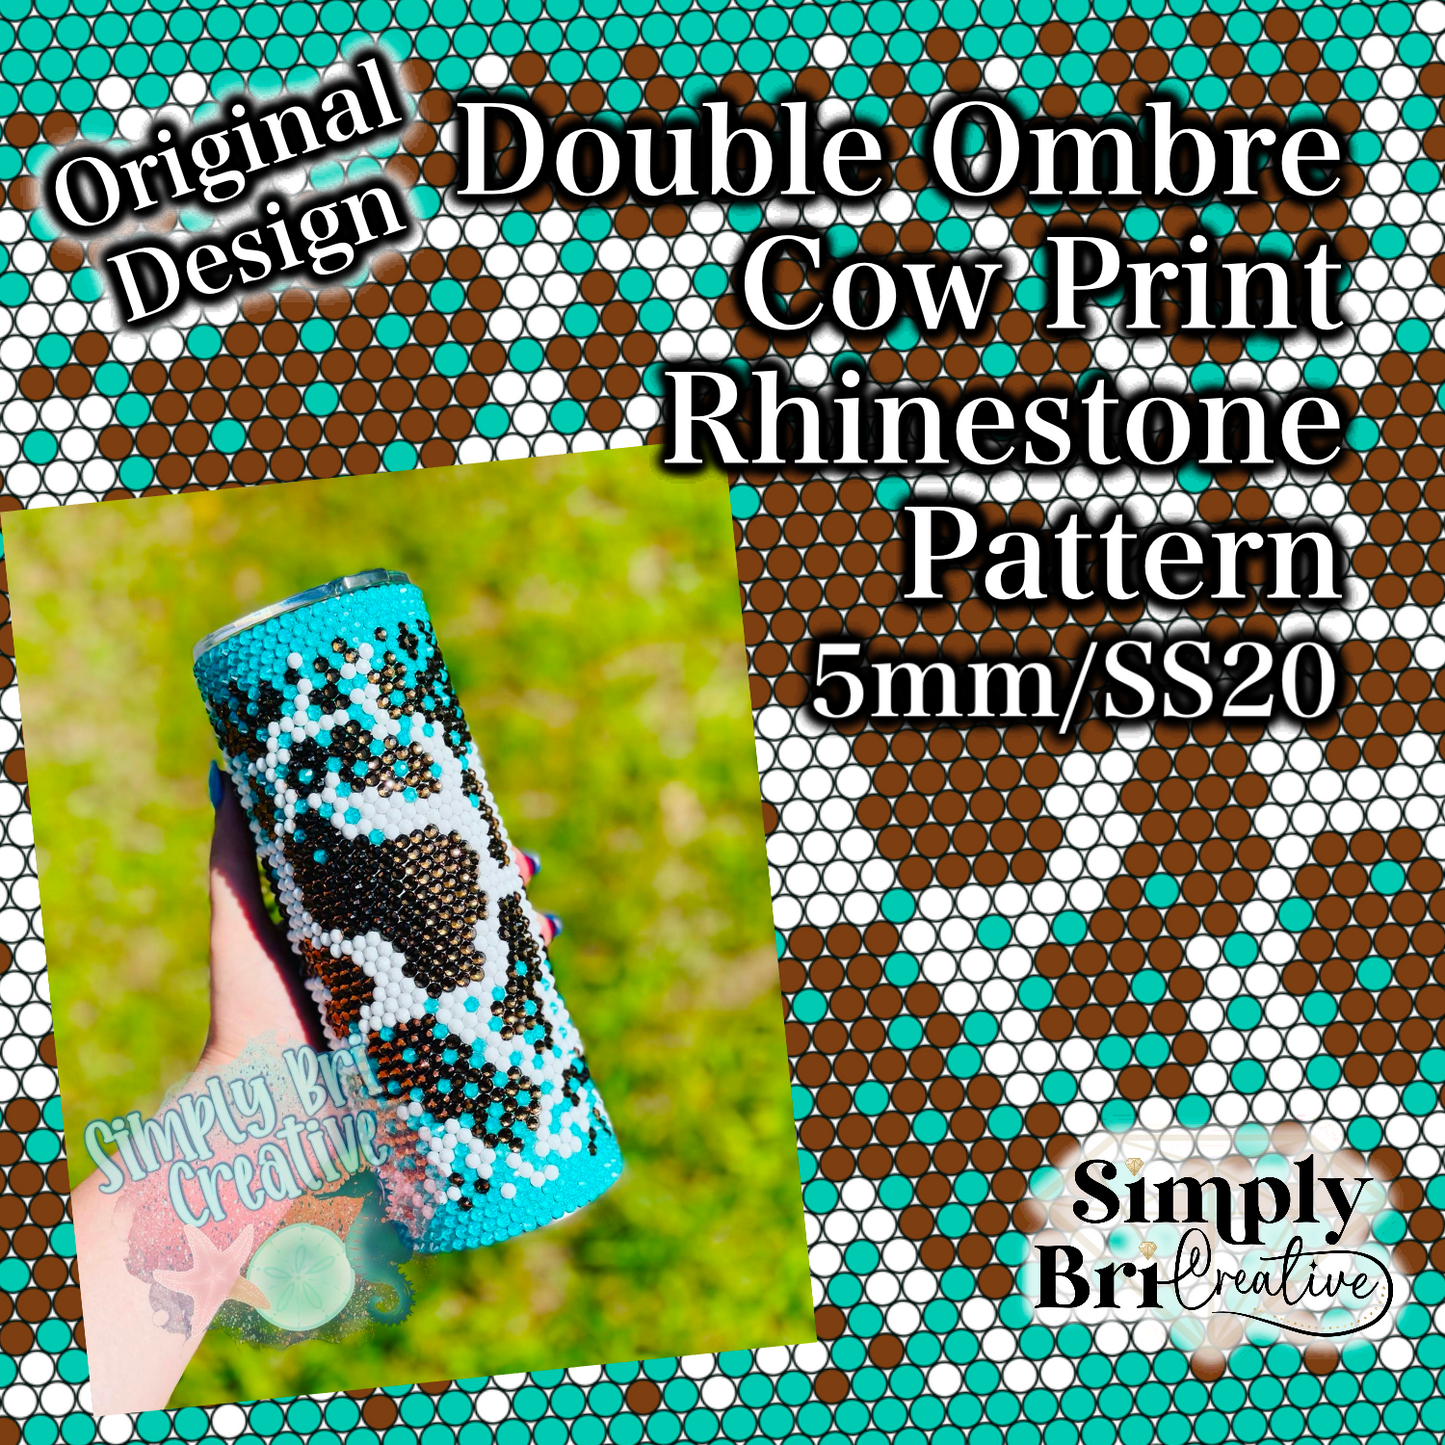 Double Ombre Cowprint Rhinestone Pattern (5mm/SS20)